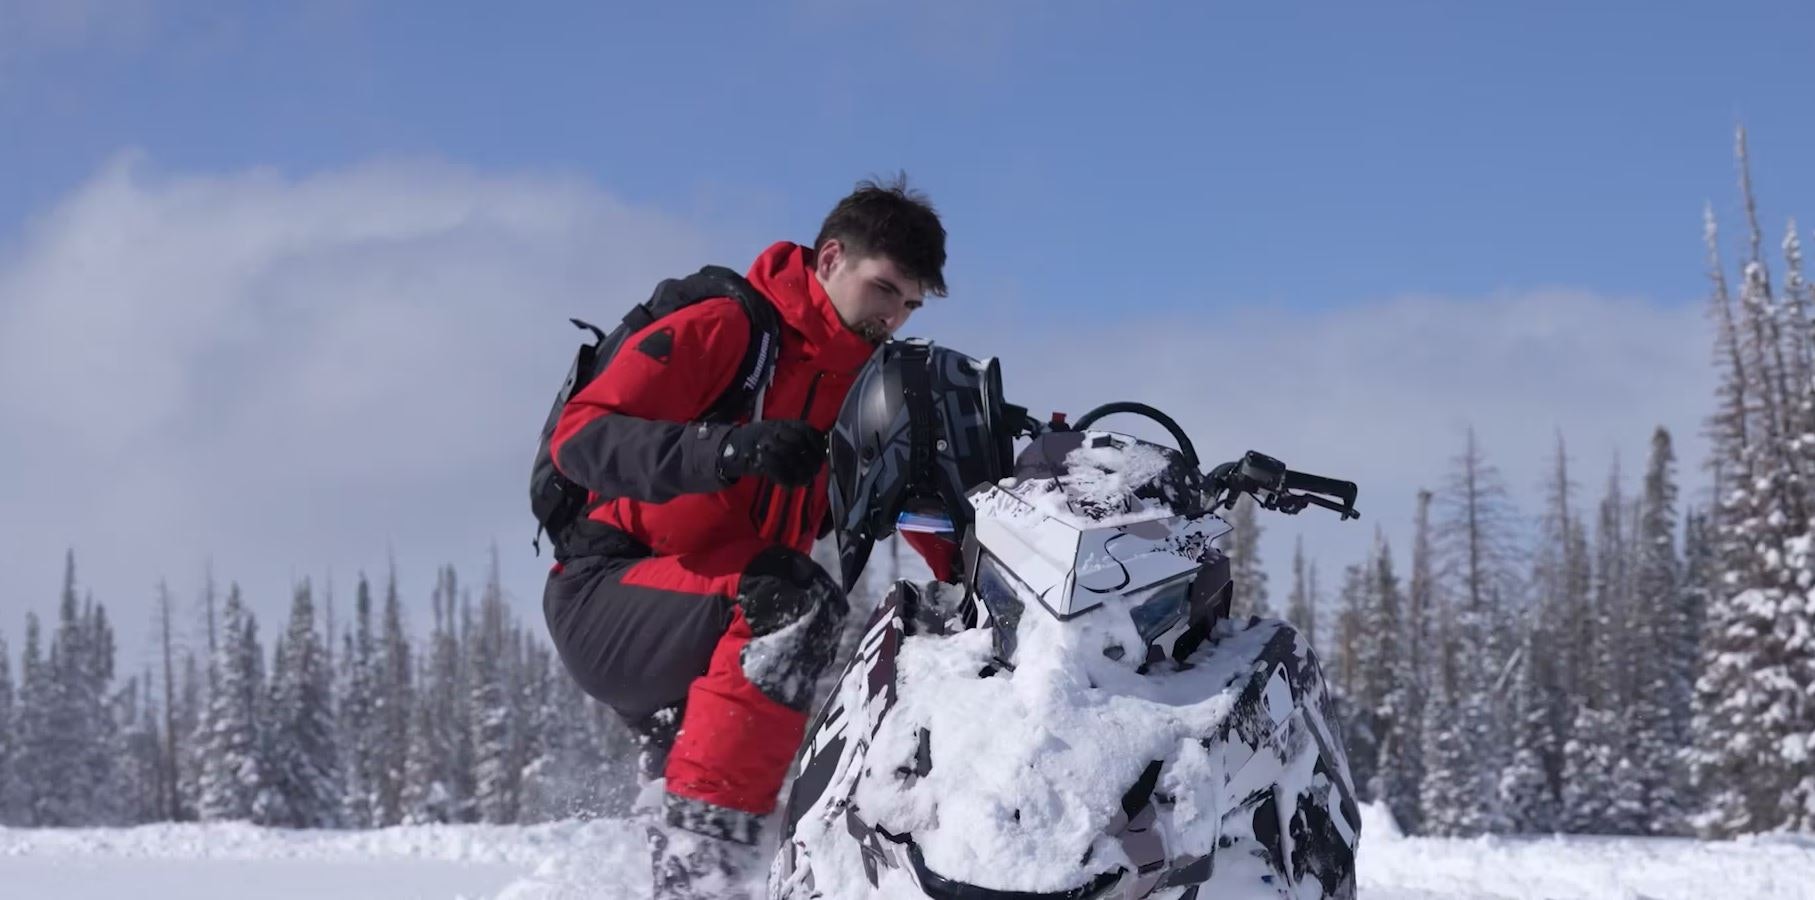 Snowmobile Clothing & Snowmobile Accessories - TOBE Outerwear